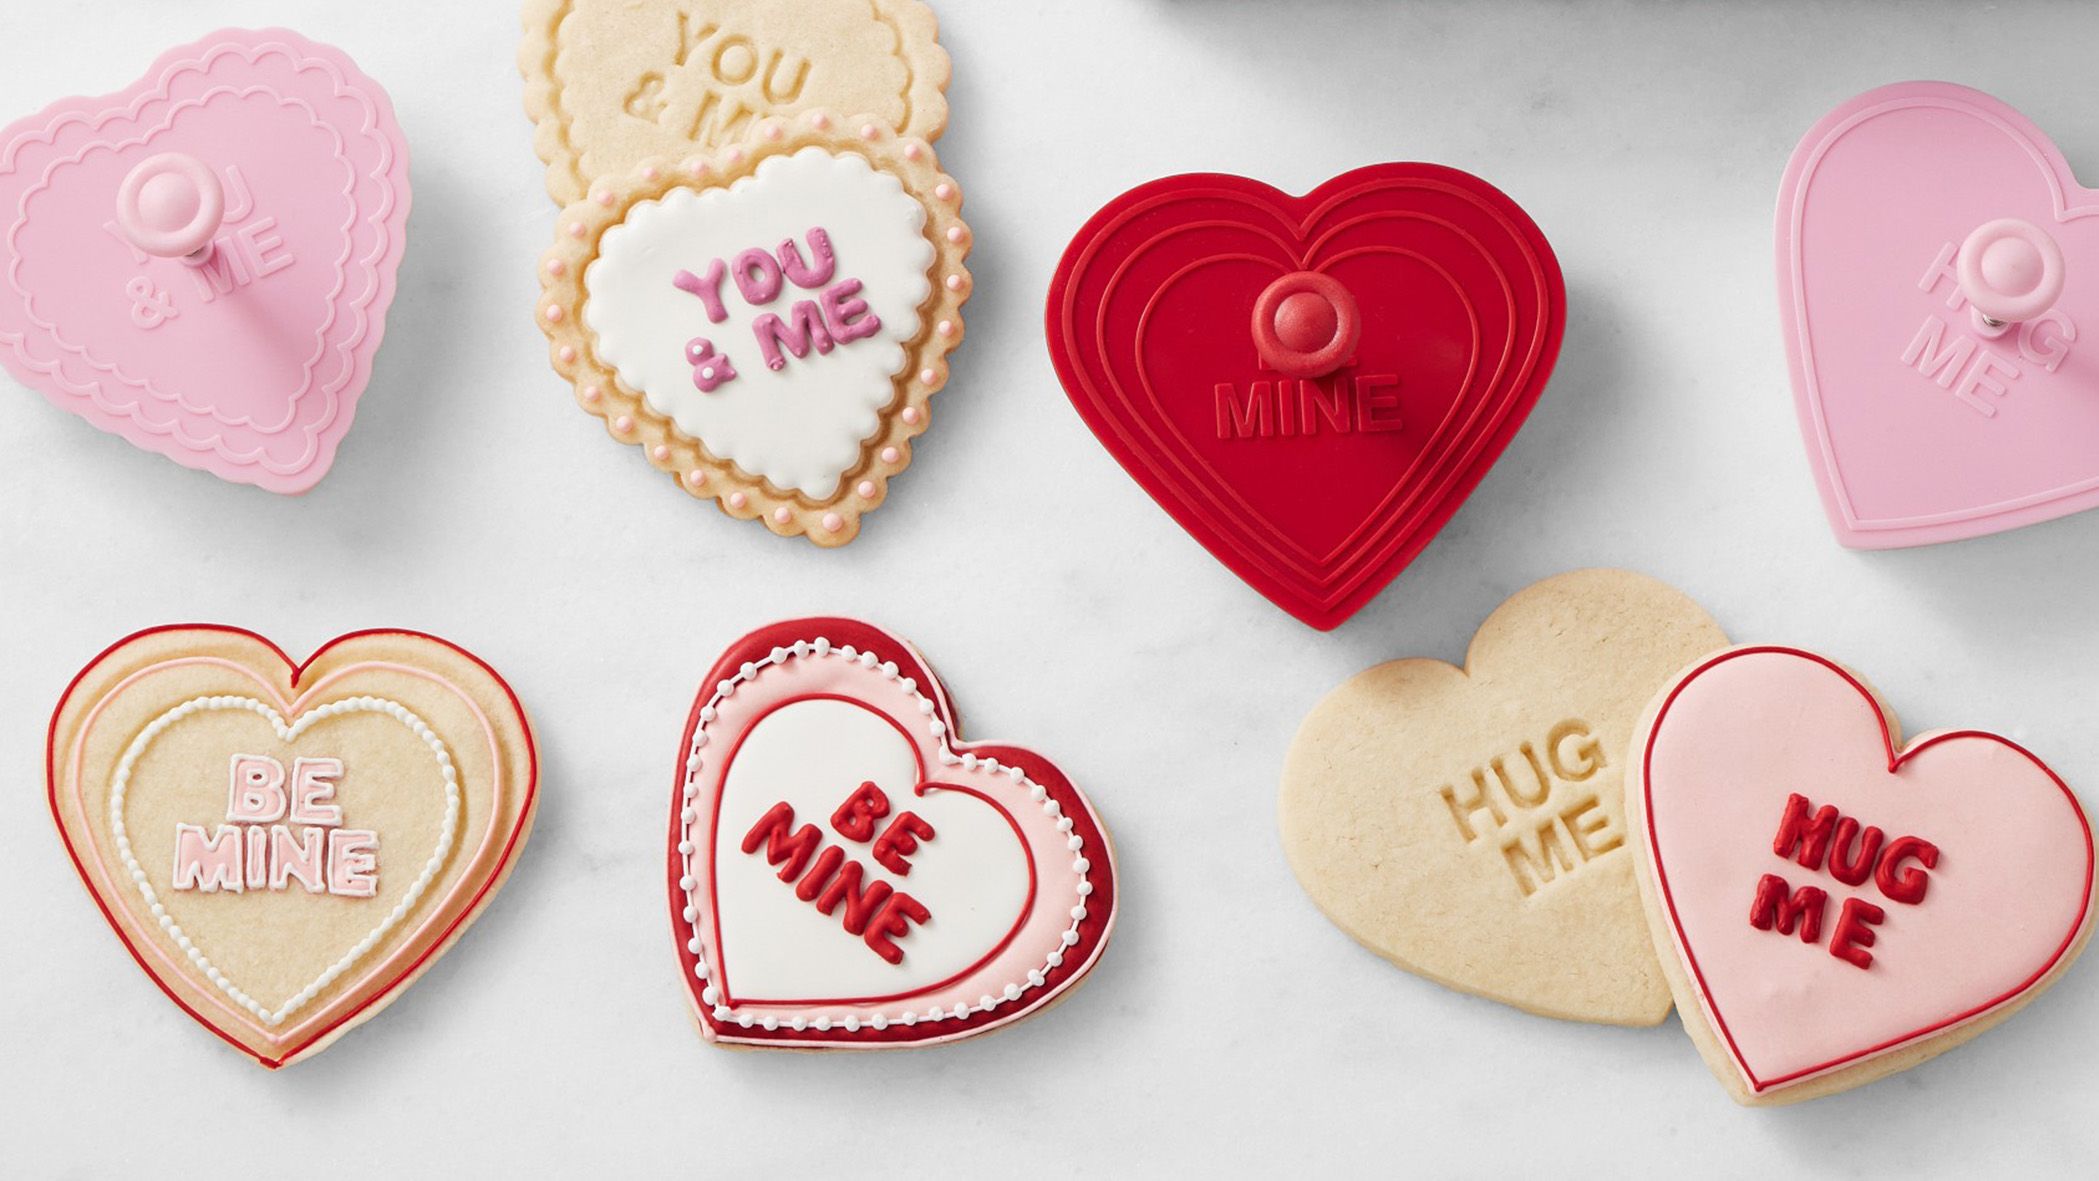 The Limited Edition Valentine's Day Date Night At Home Kit